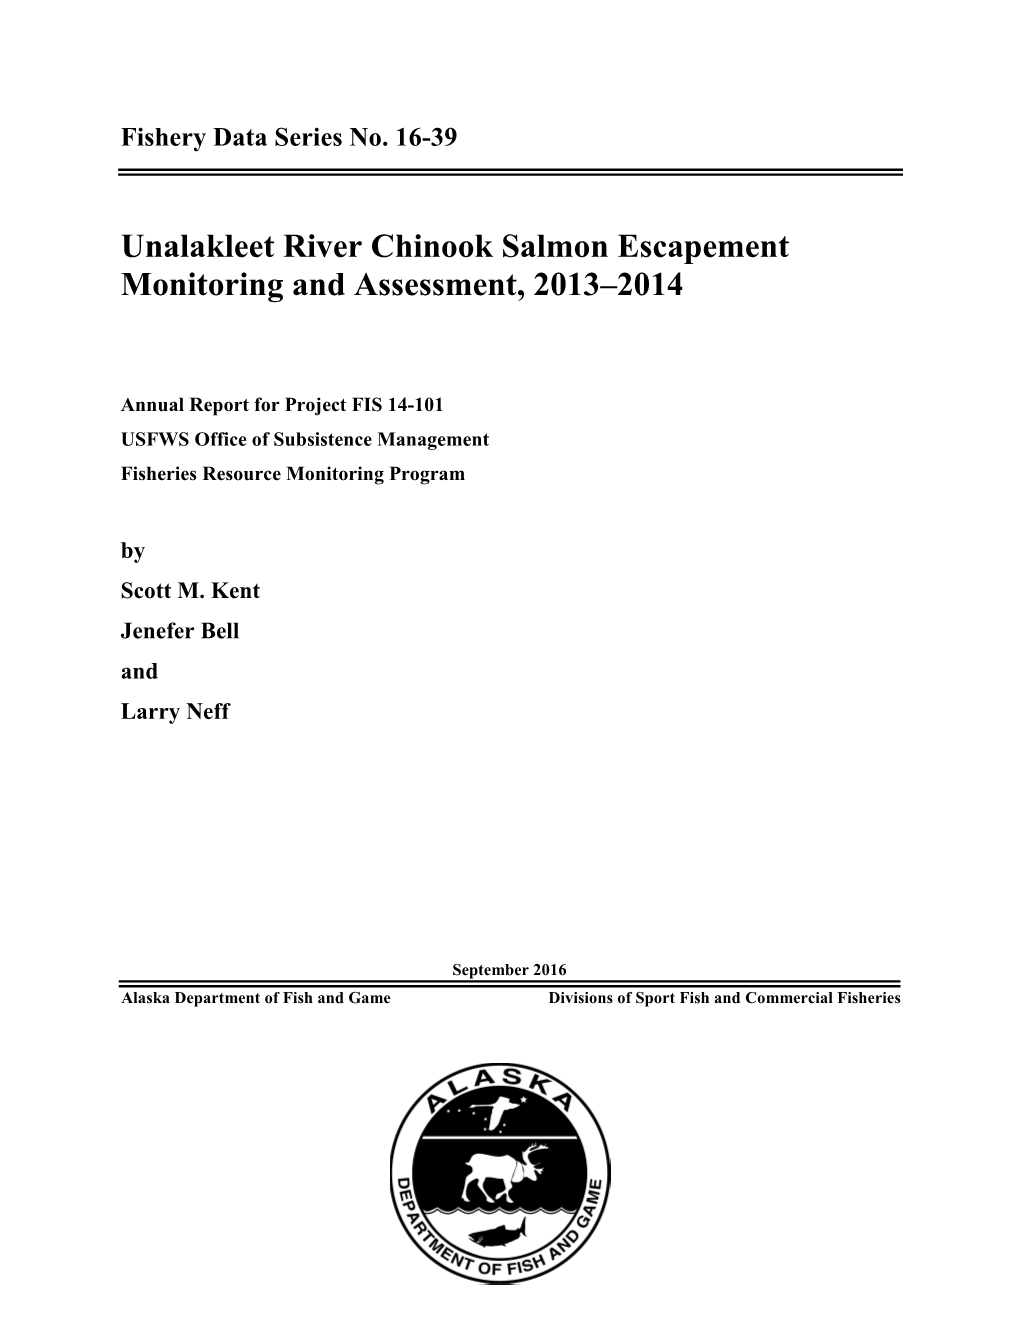 Unalakleet River Chinook Salmon Escapement Monitoring and Assessment, 2013–2014